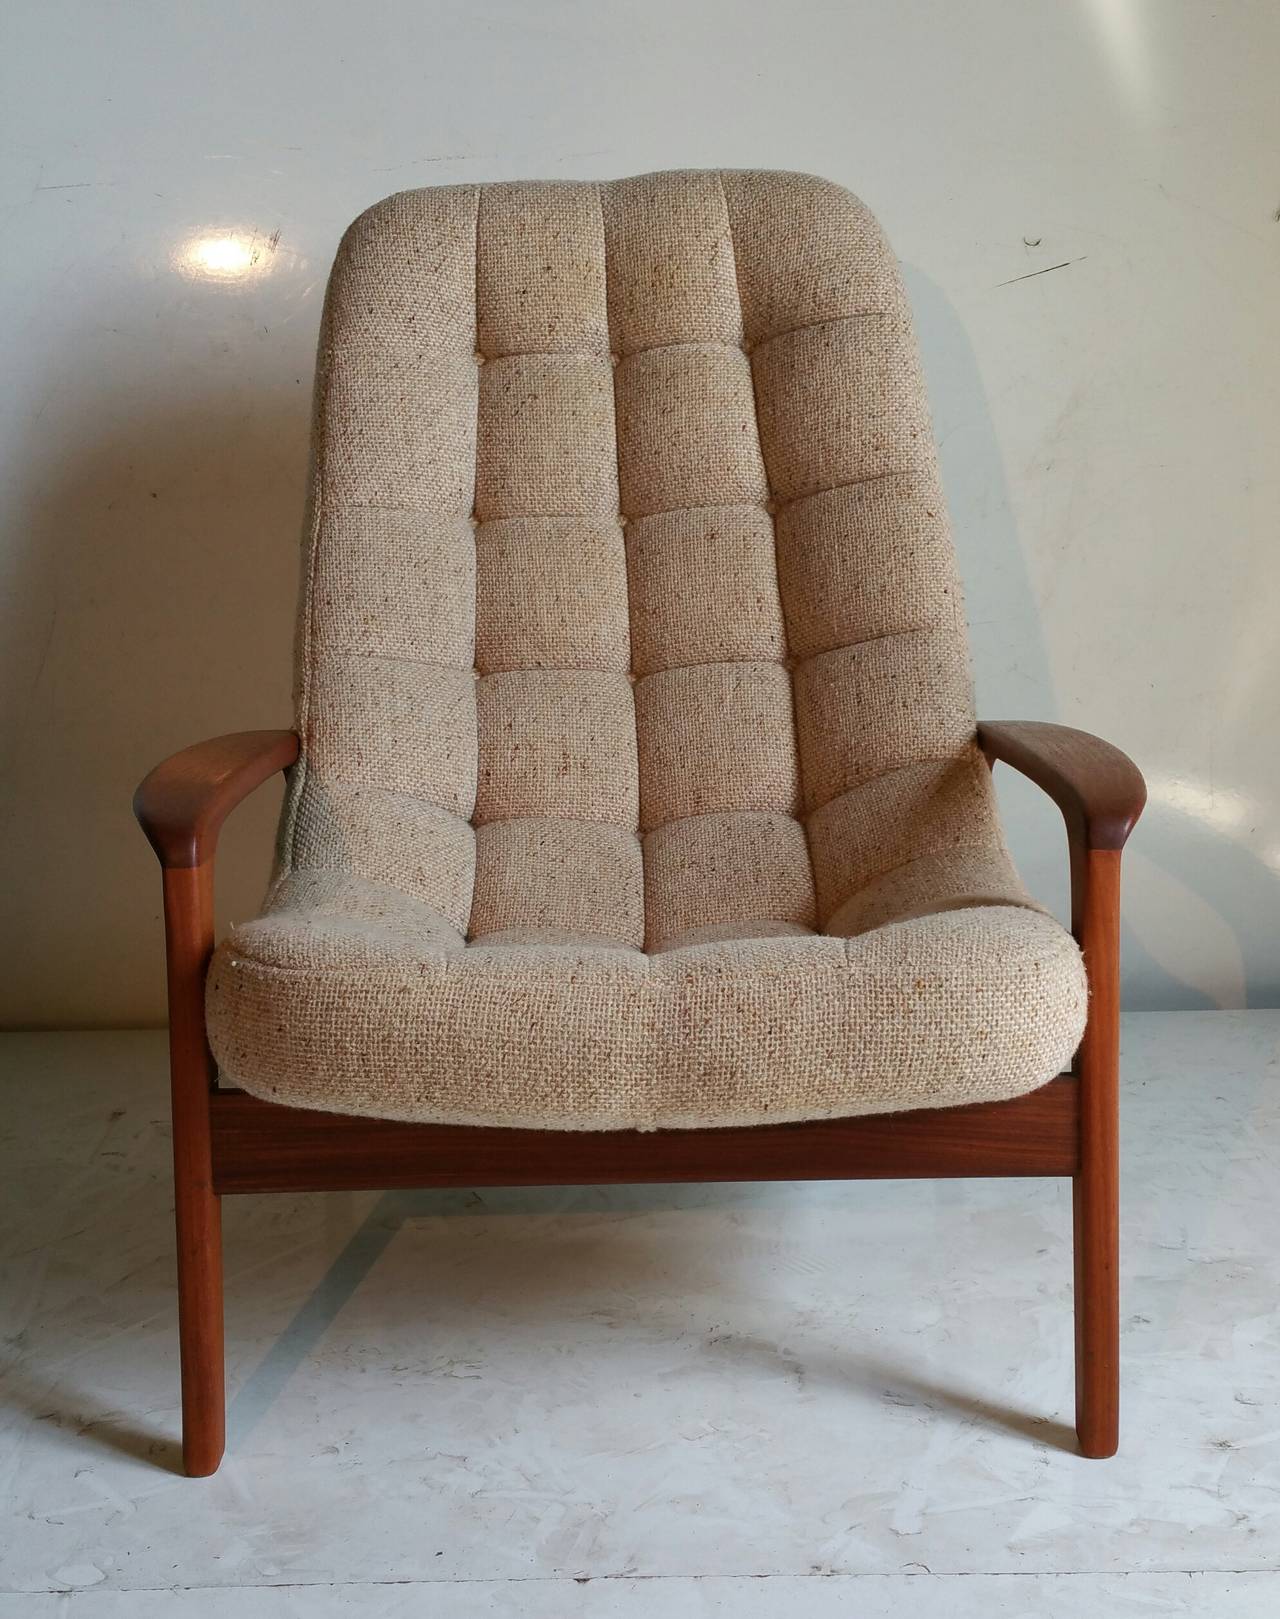 Vintage Teak Floating Egg Chair by R. Huber & Co,,,,Extremely comfortable,, Solid teak wood frame,, Original,,(period) 1960s fabric,,,Please see other listing for matching sofa,